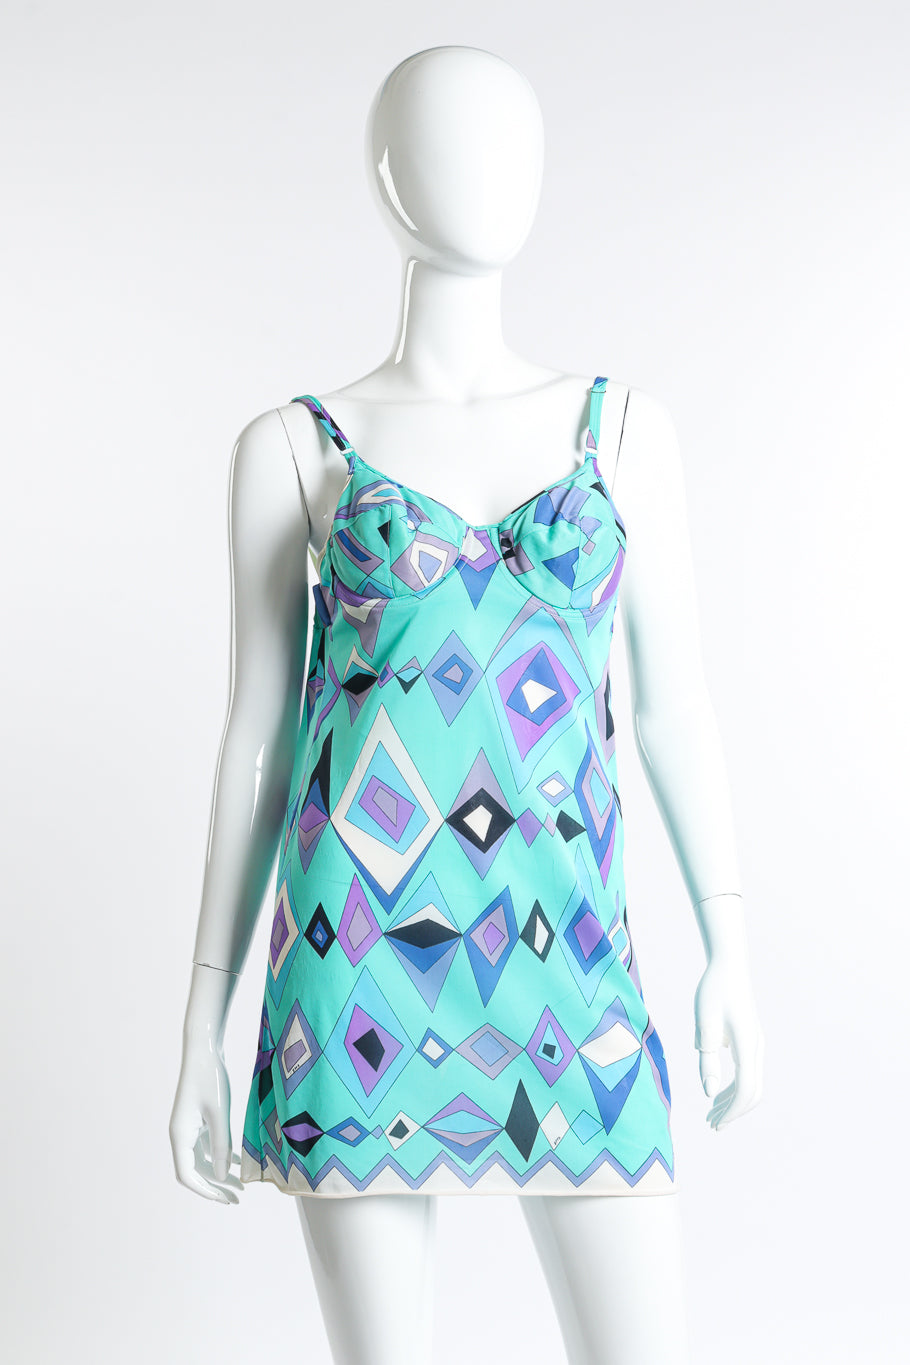 Vintage Emilio Pucci for Formfit Rogers teal purple and white geo chemise slip dress front view as worn on mannequin @Recess LA